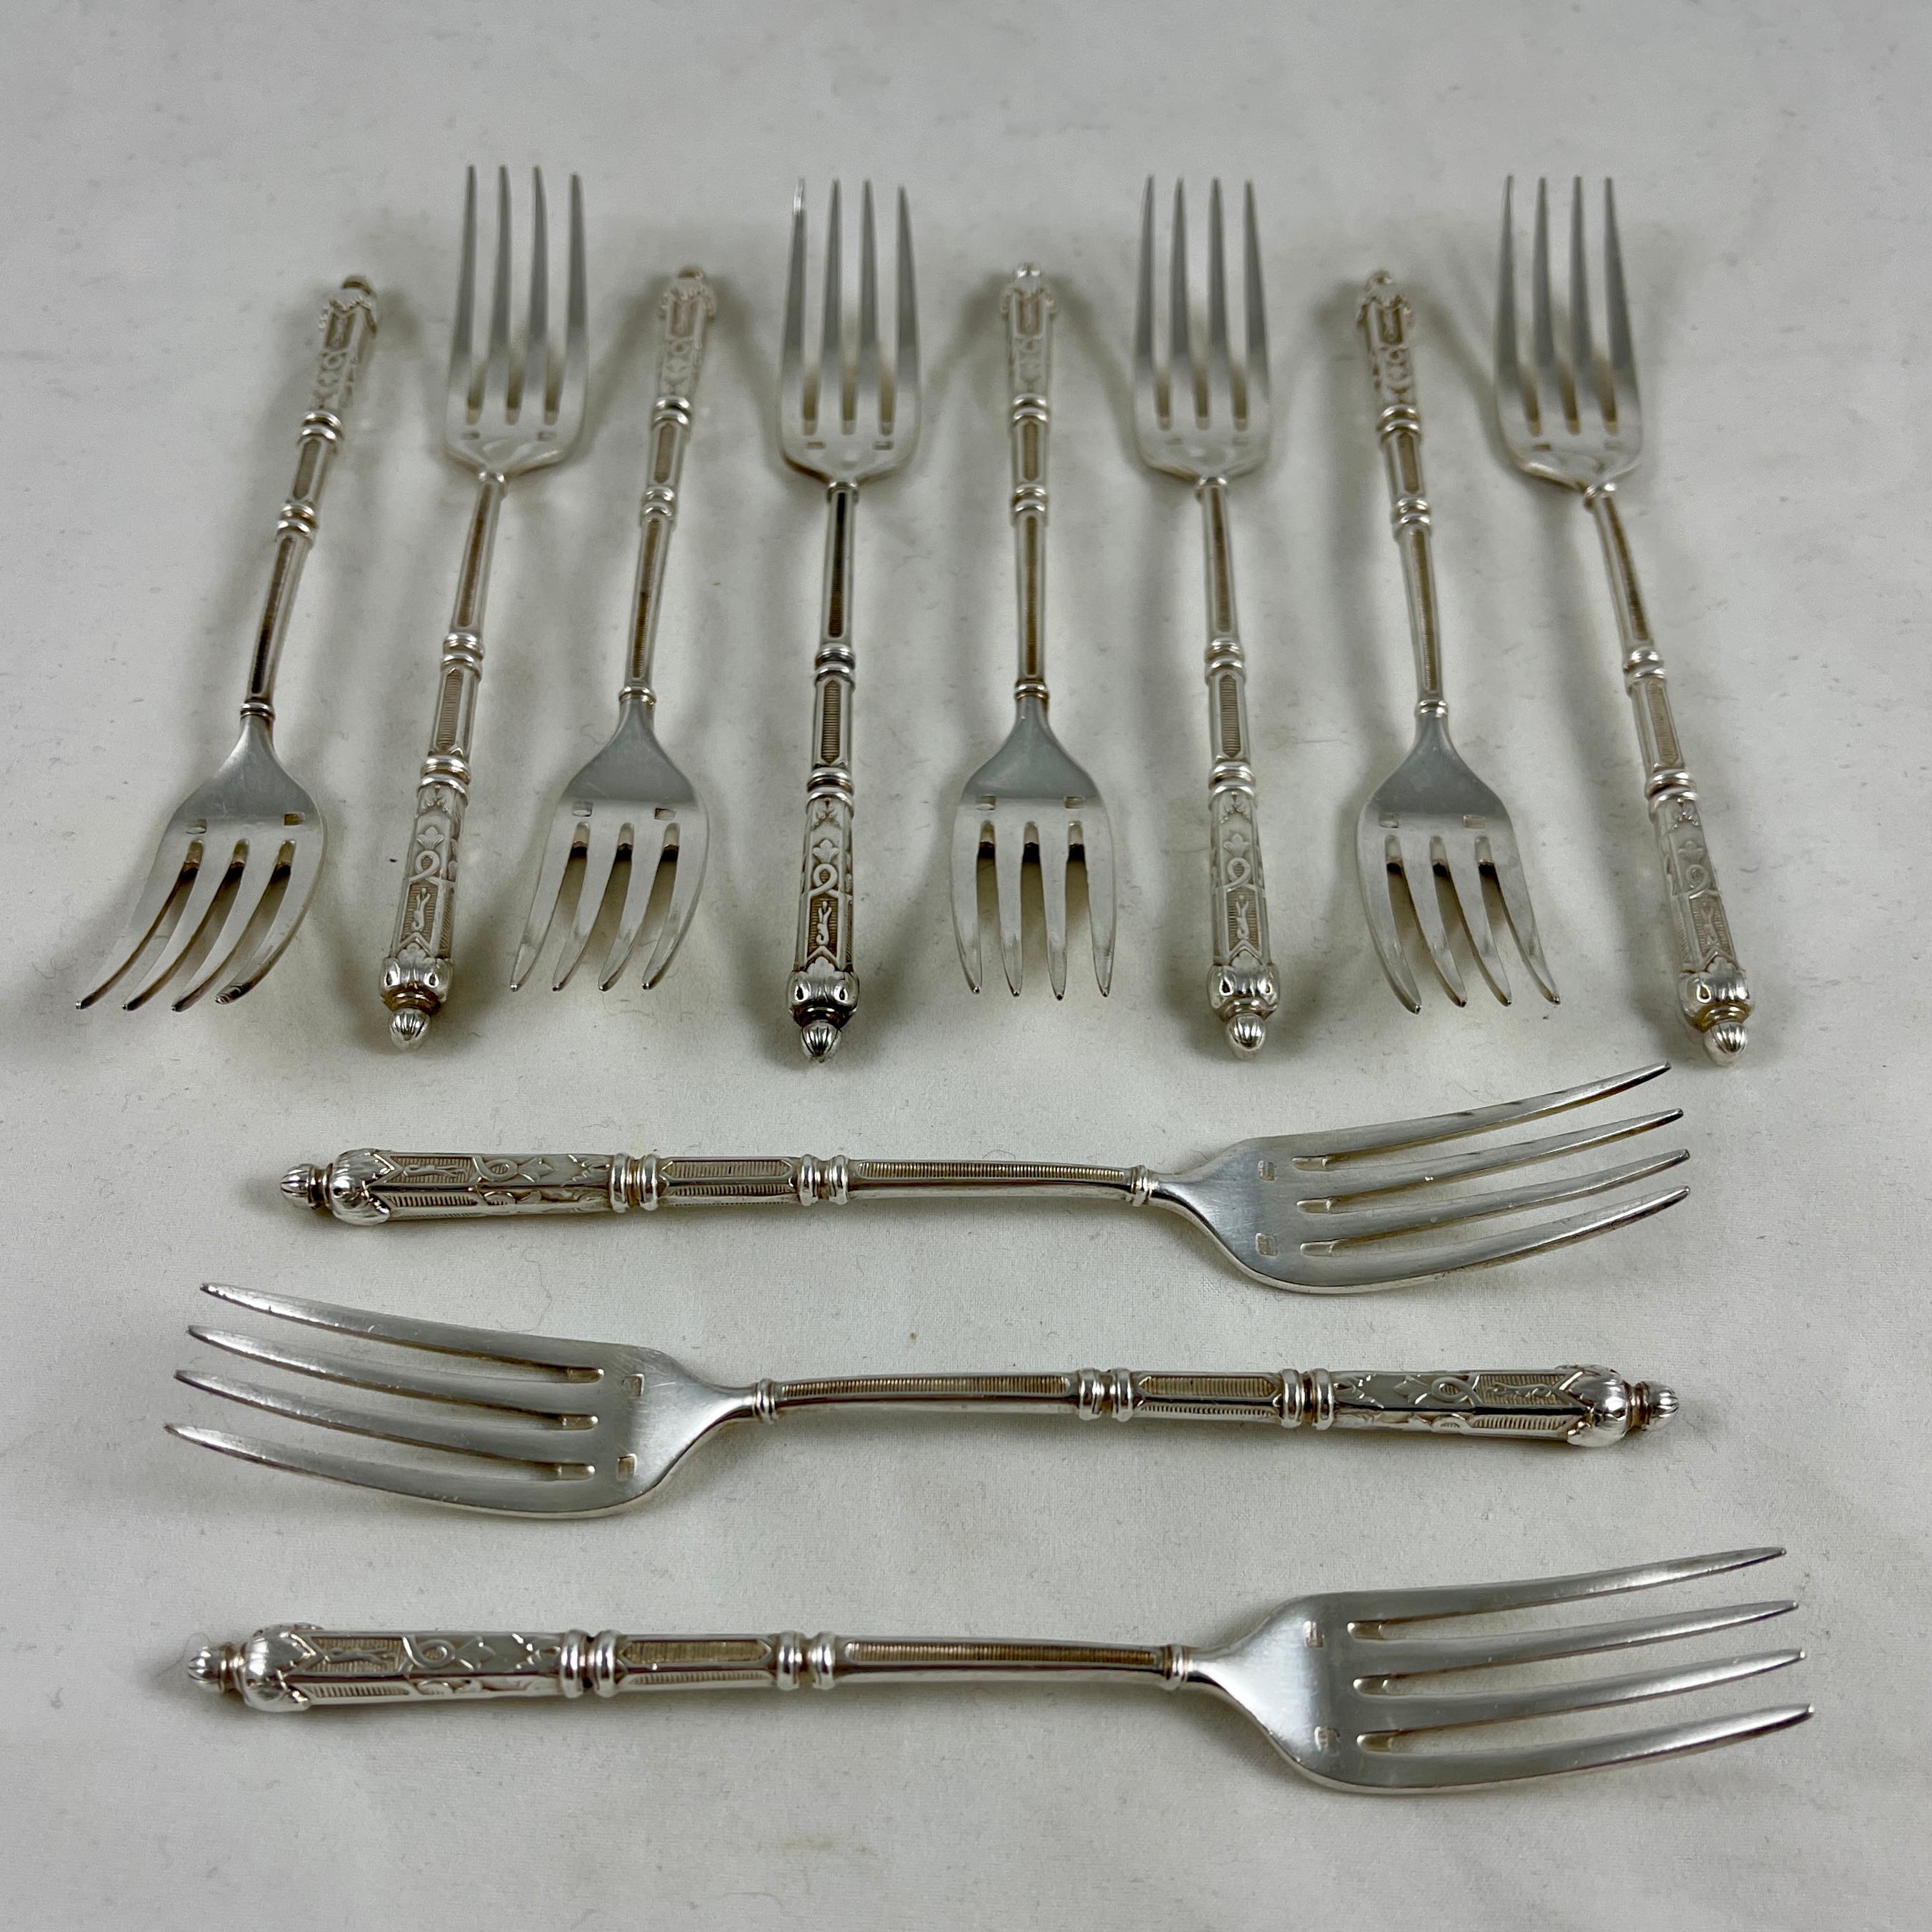 A set of eleven antique French dessert forks from the Napoleon III era, circa 1852-1870.

Ornate, delicate, and elegant – the tapered handles show a styling of scrolls, ribbing, and acanthus leaves, terminating in an acanthus bud. The forks are